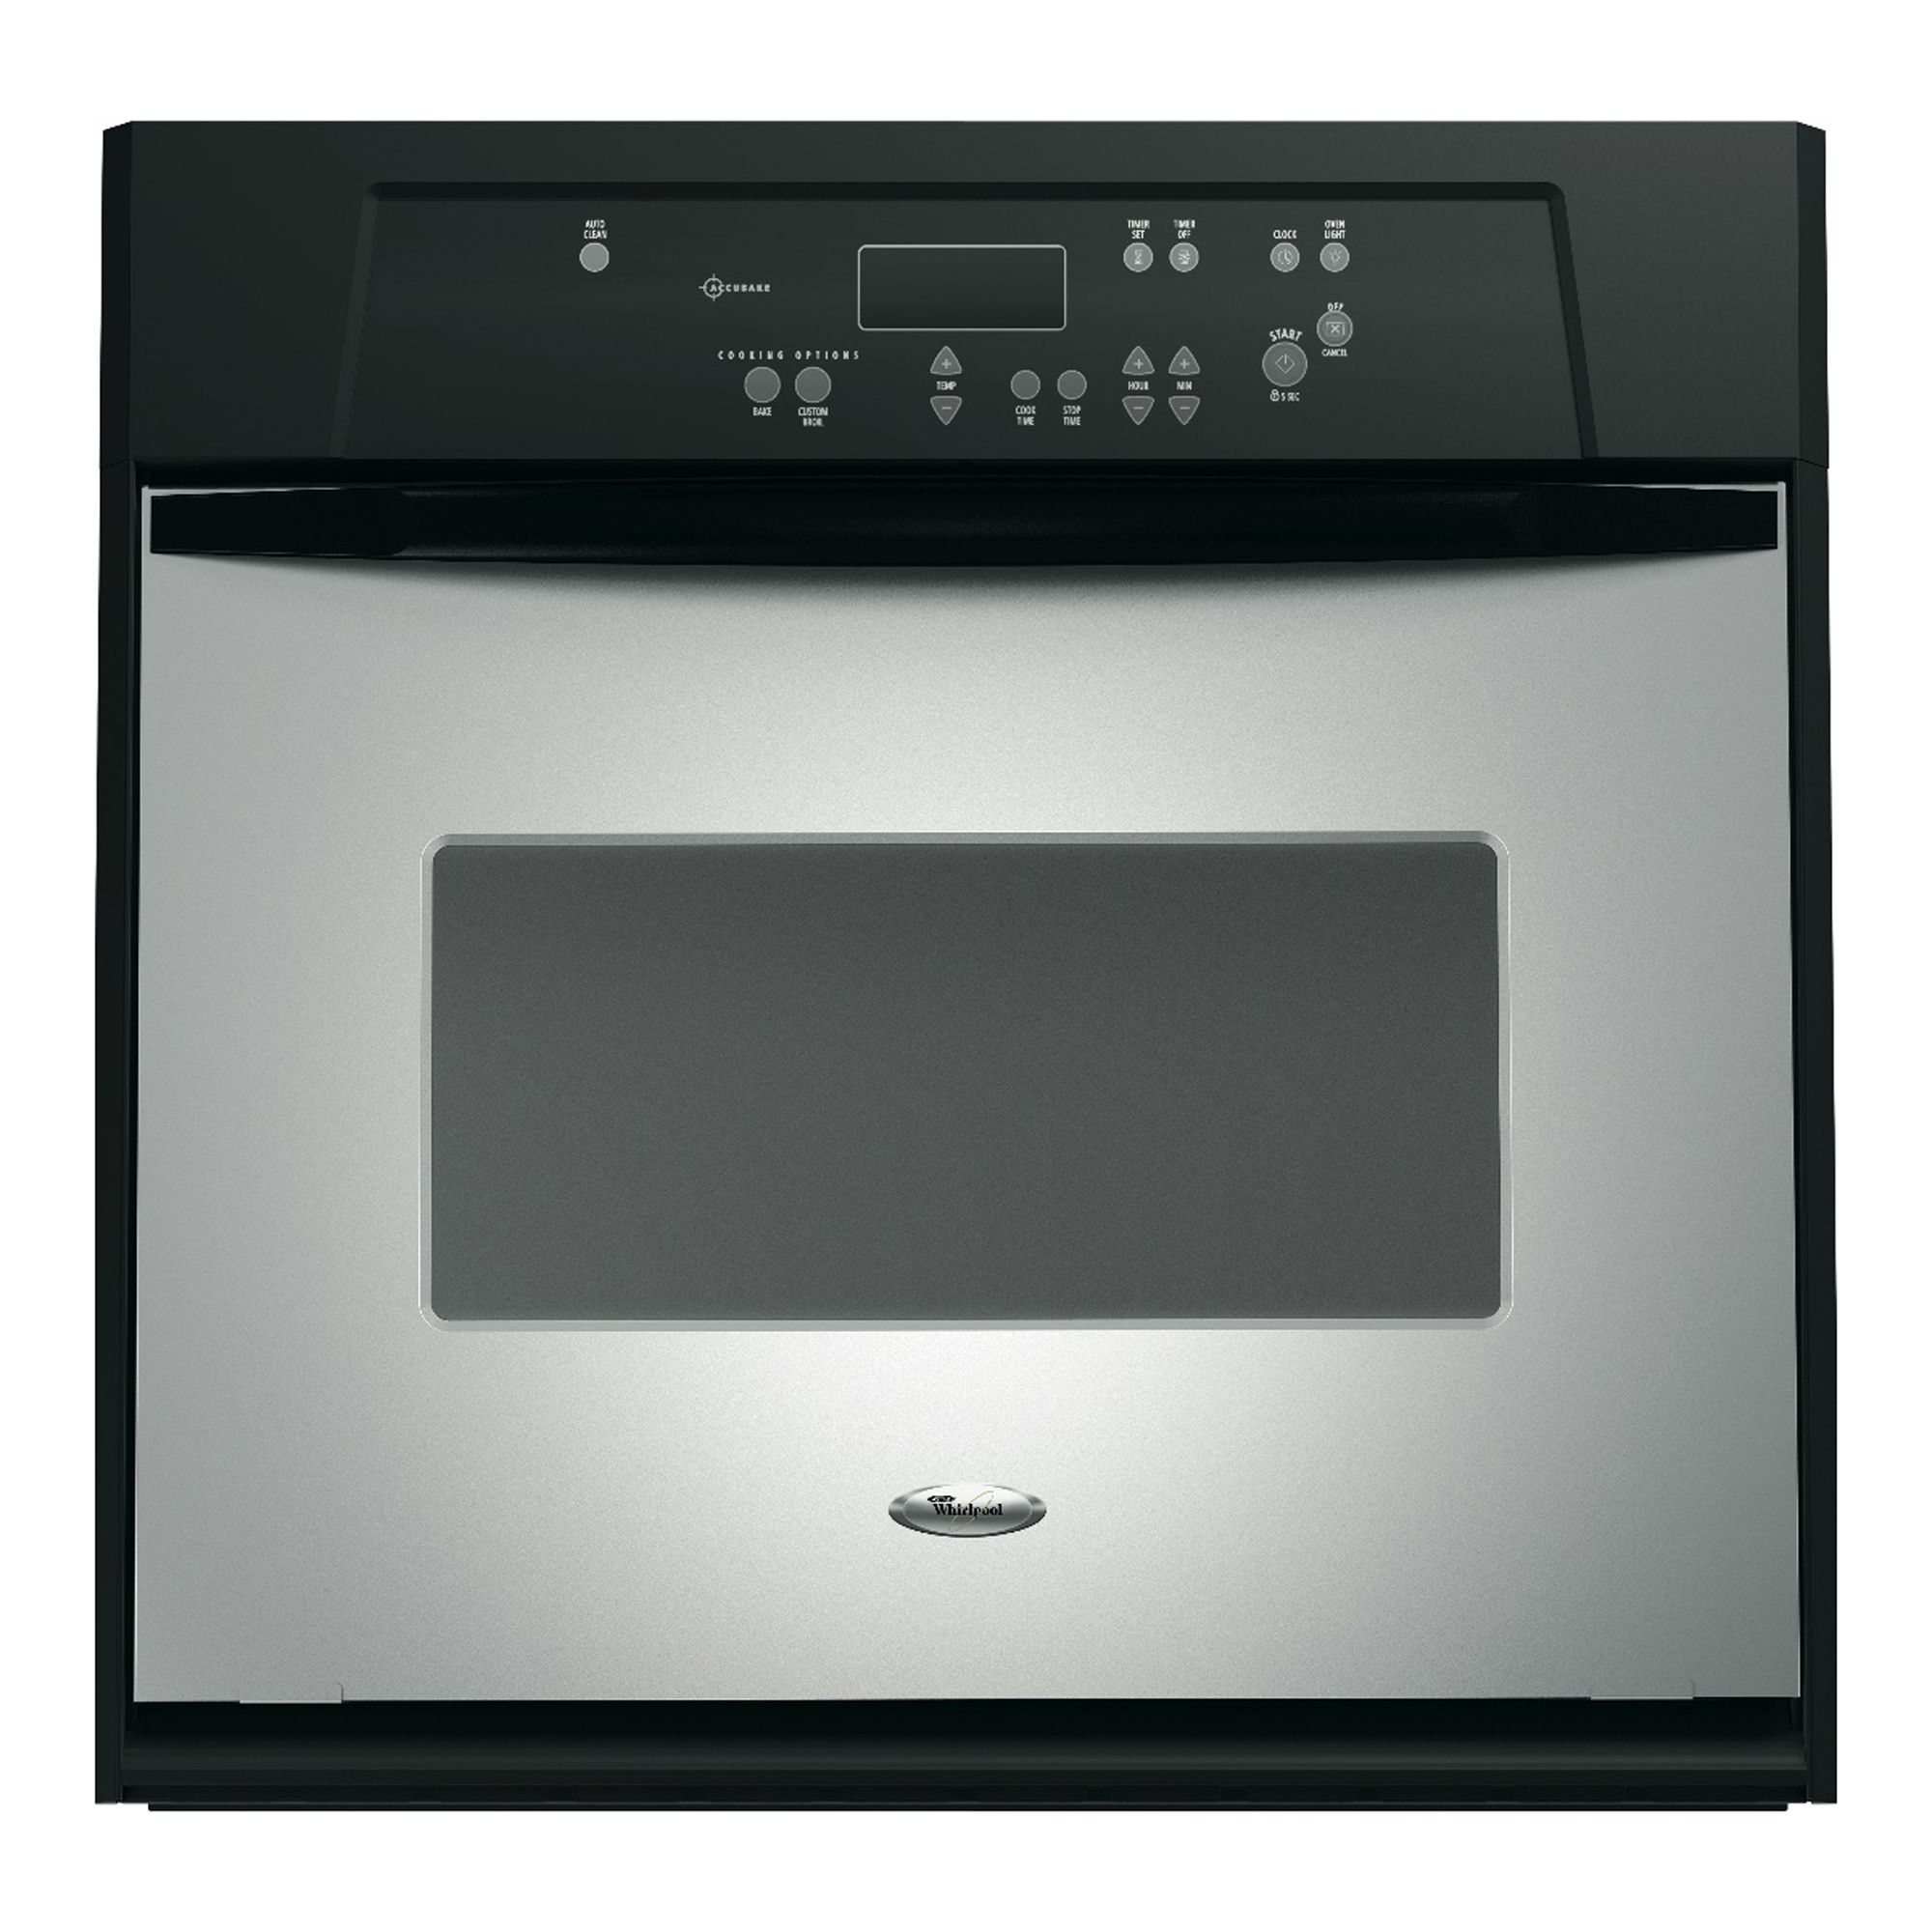 whirlpool accubake gas oven self cleaning instructions